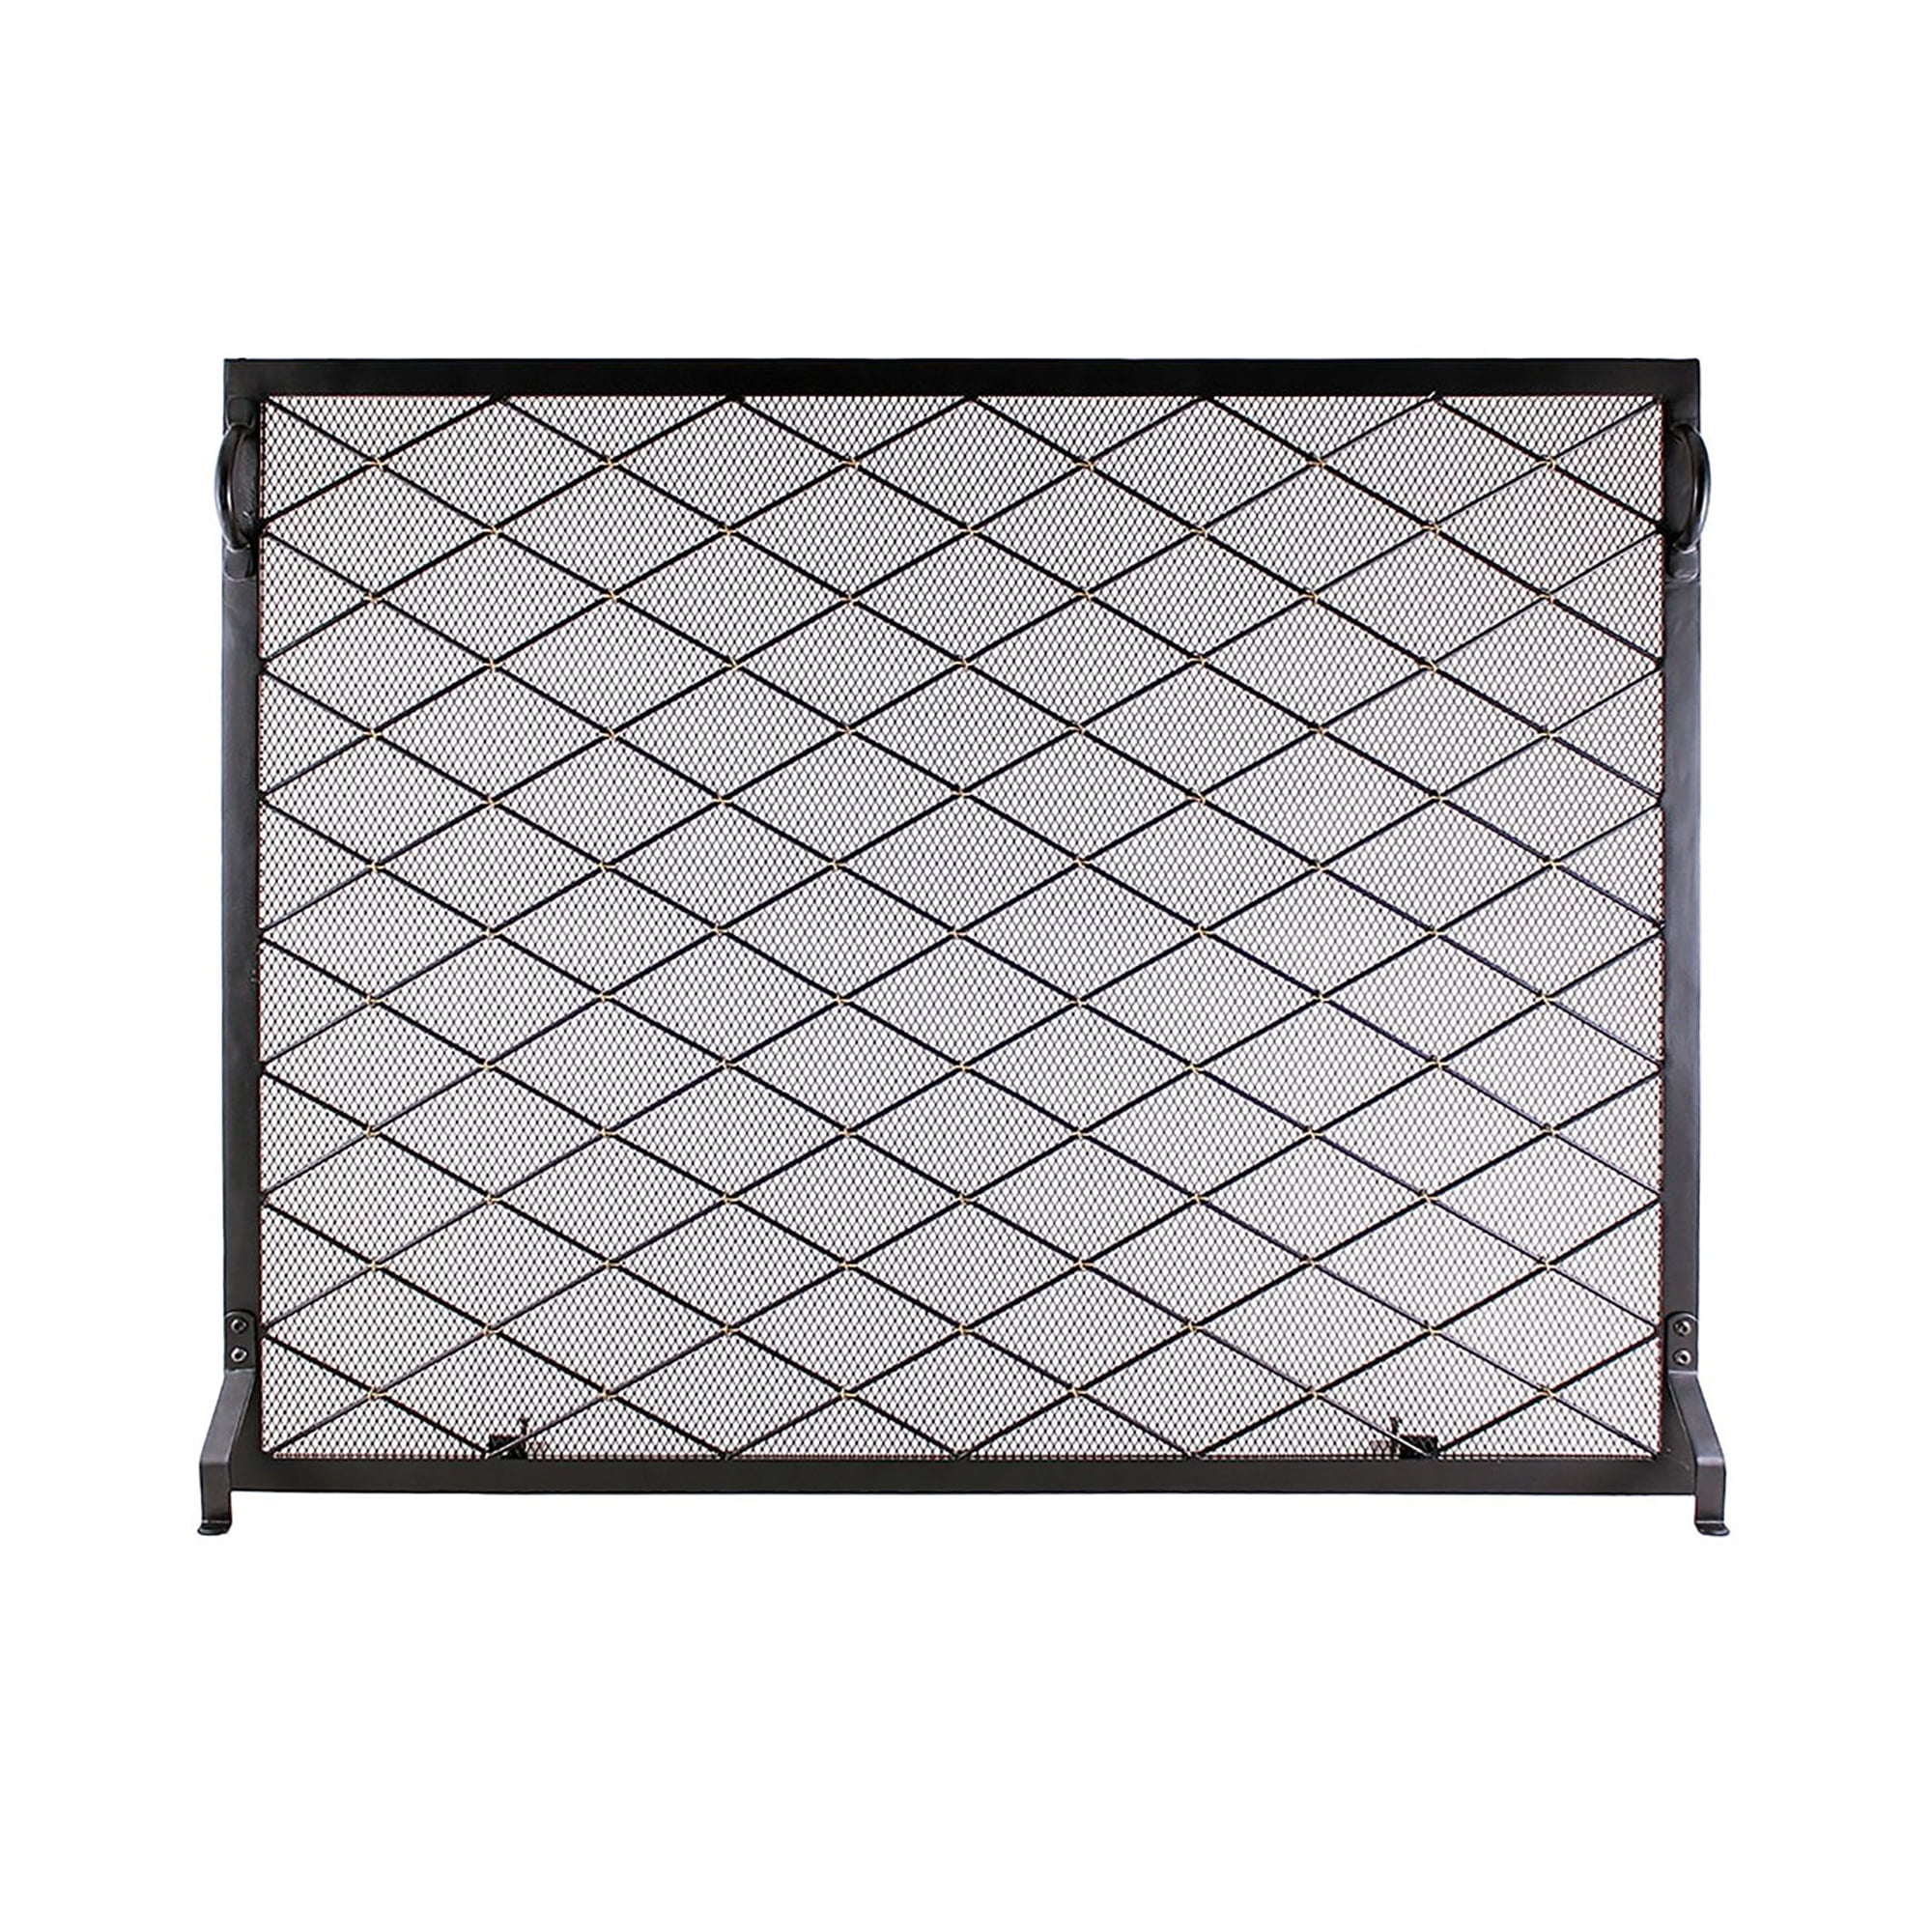 Picture of Minuteman SF-3830 38 x 30 in. Harlequin Flat Fireplace Screen